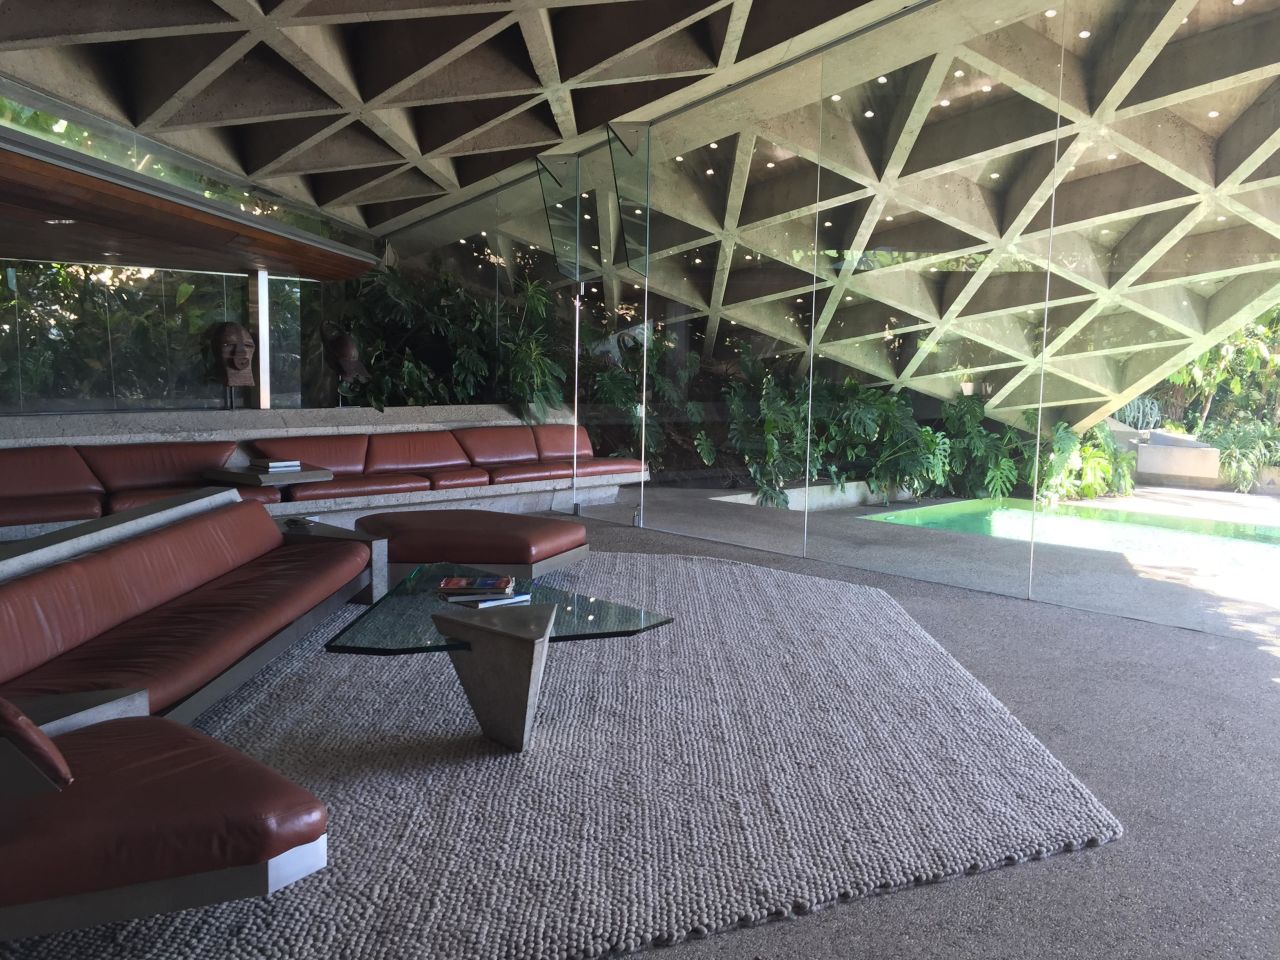 The concrete, wood and steel-built living room of the Sheats Goldstein residence has been featured in several films, including "The Big Lebowski" and "Charlie's Angels" -- as well as the Snoop Dogg and Pharrell Williams video for "Let's Get Blown."